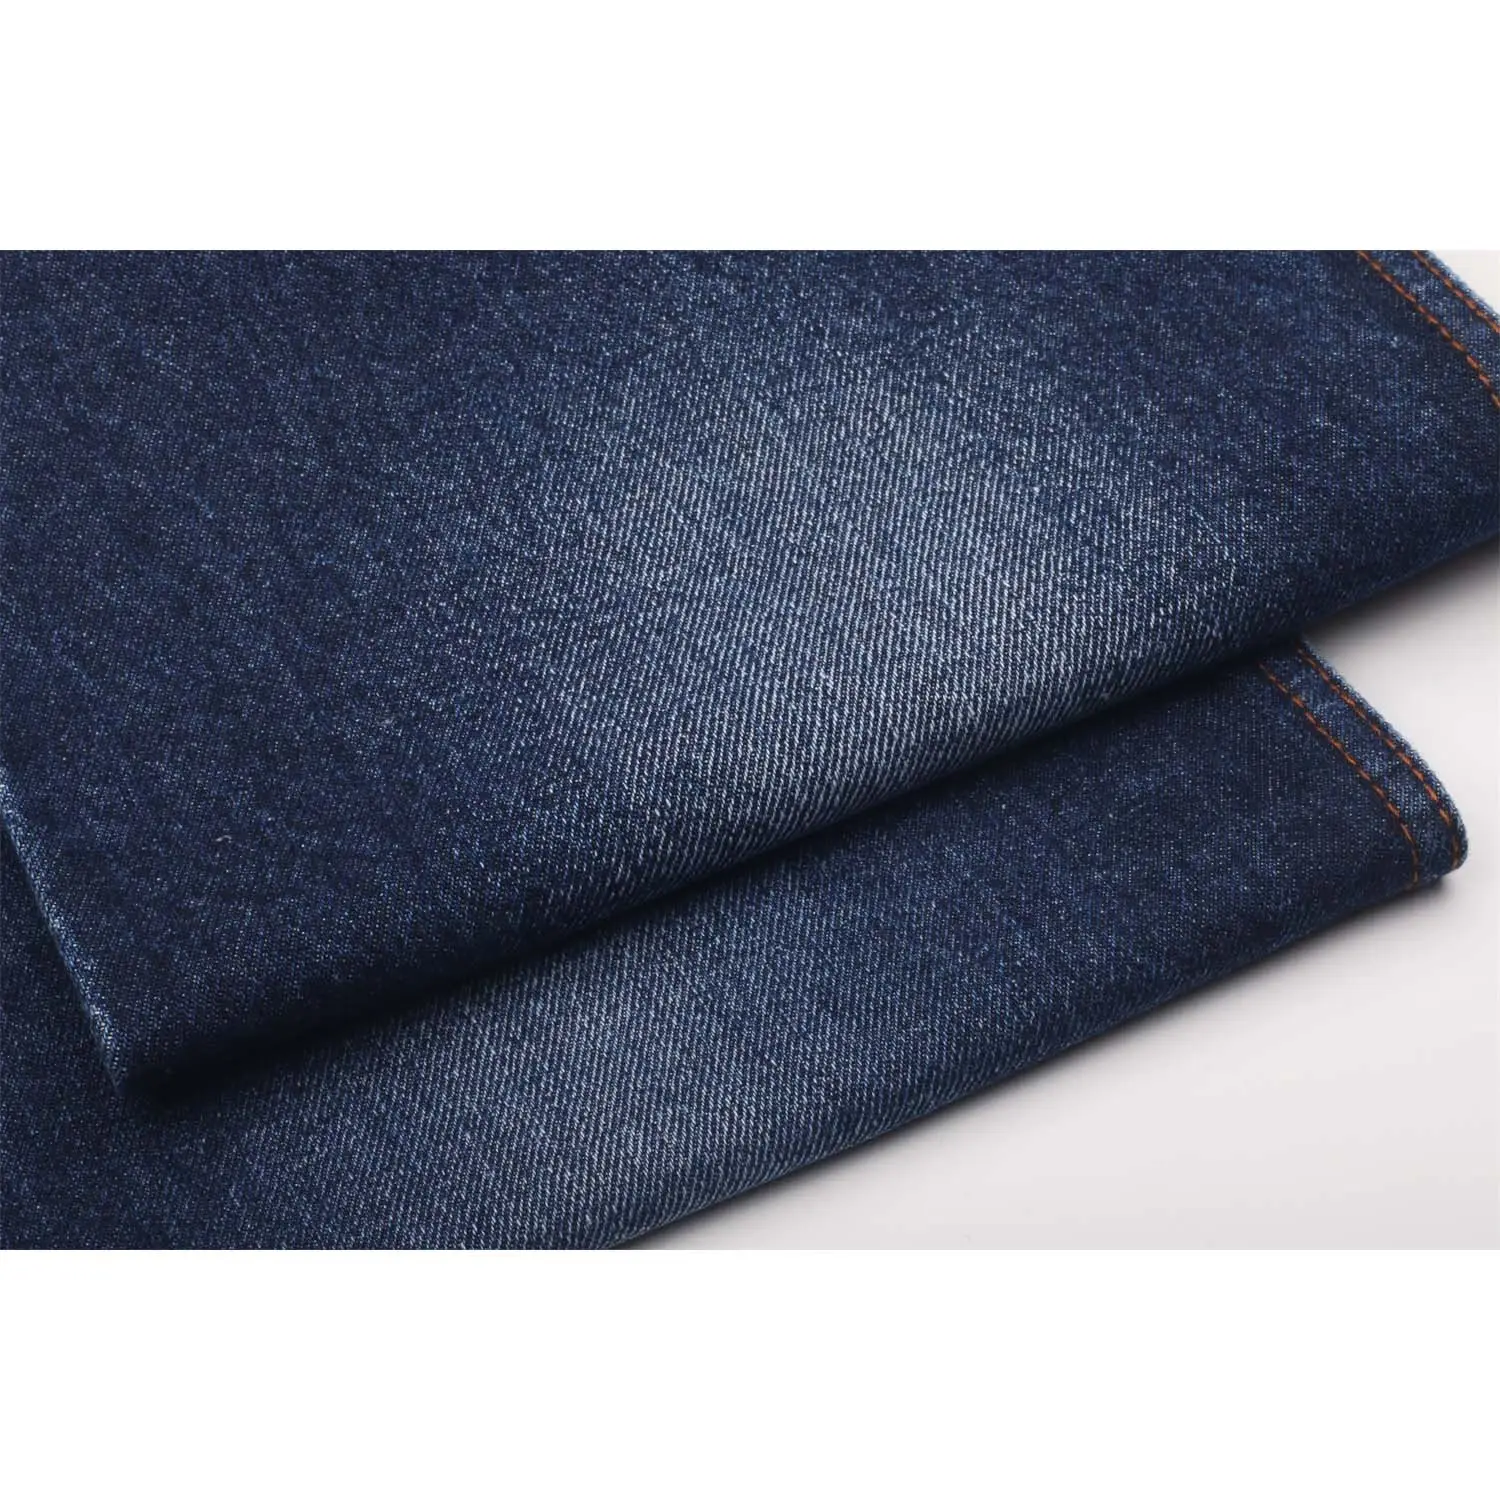 High Quality Heavy Dark Blue 12.6oz 100%Cotton Denim Fabric Soft Hand Feel Cotton Jeans Material for Men's Jeans with Low Price